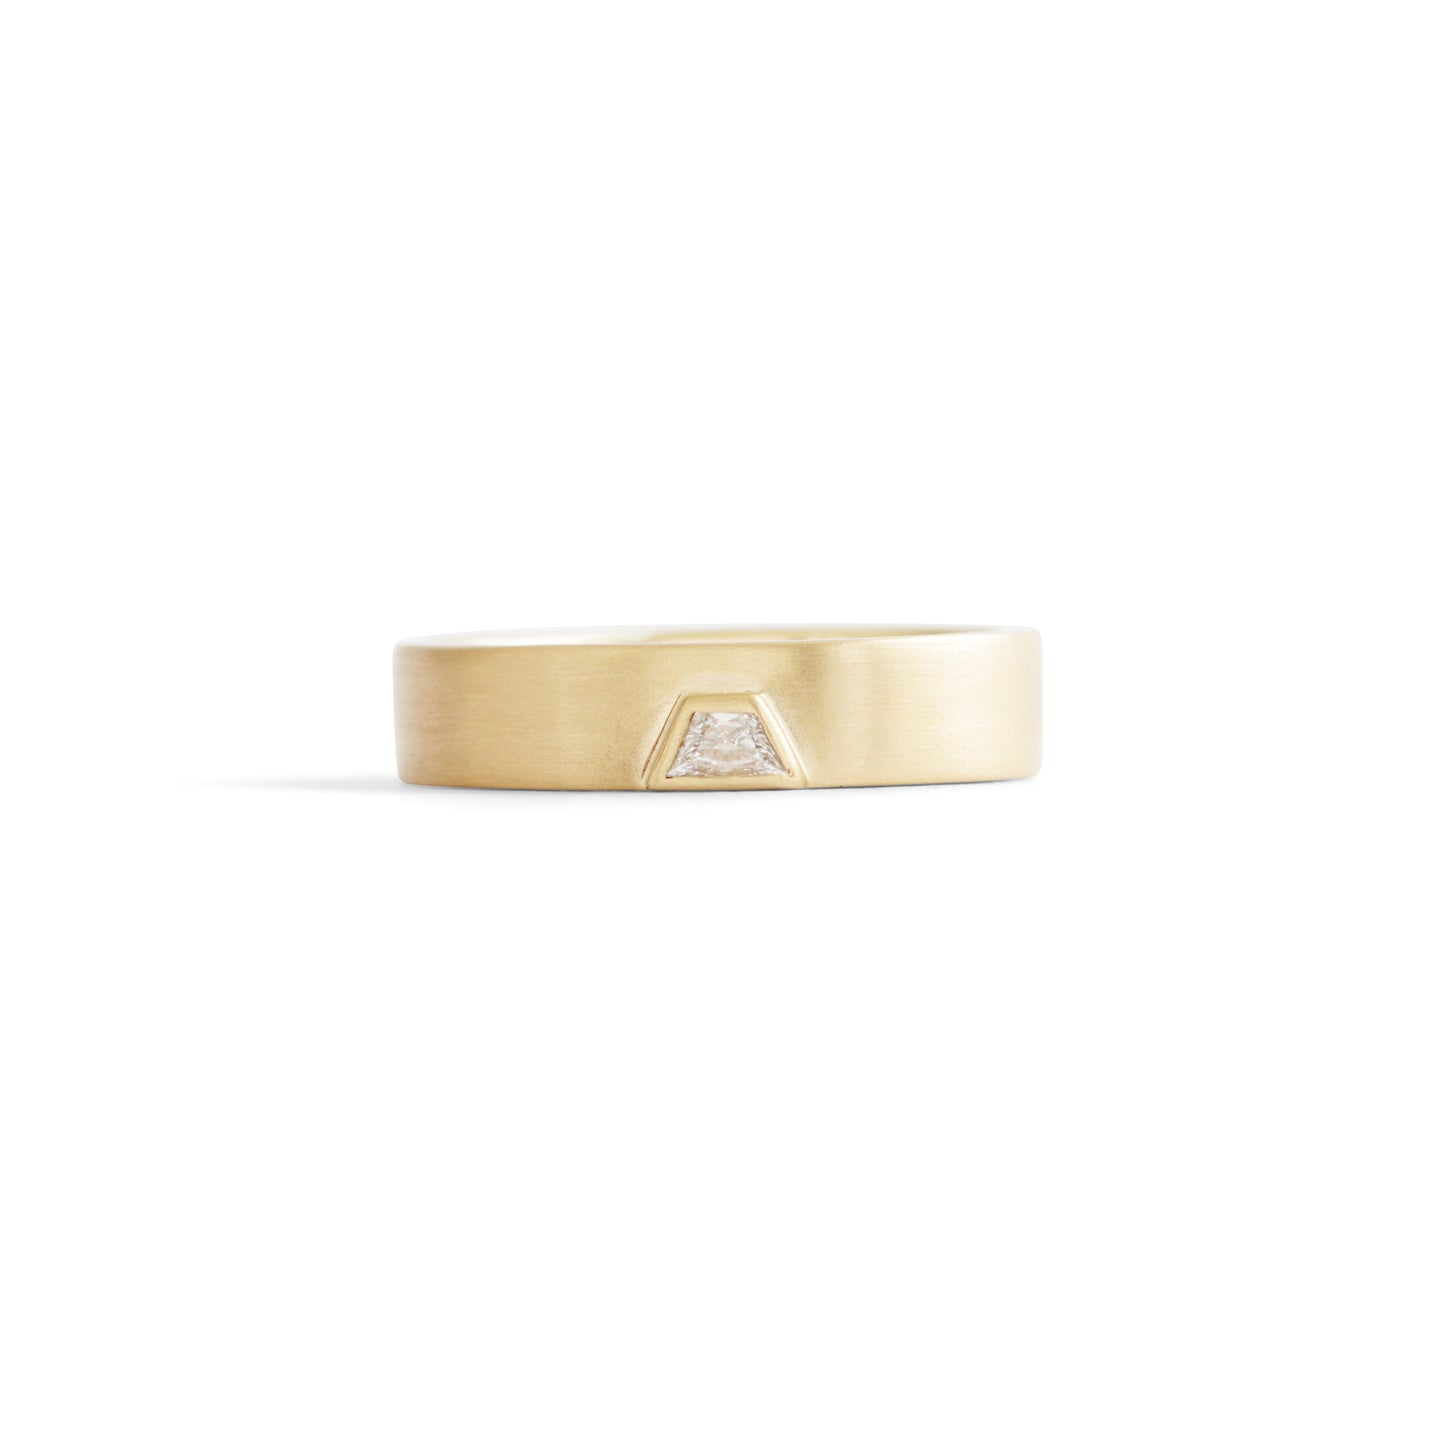 Load image into Gallery viewer, Horizon Band / Trapezoid Diamond - Goldpoint Studio - Greenpoint, Brooklyn - Fine Jewelry
